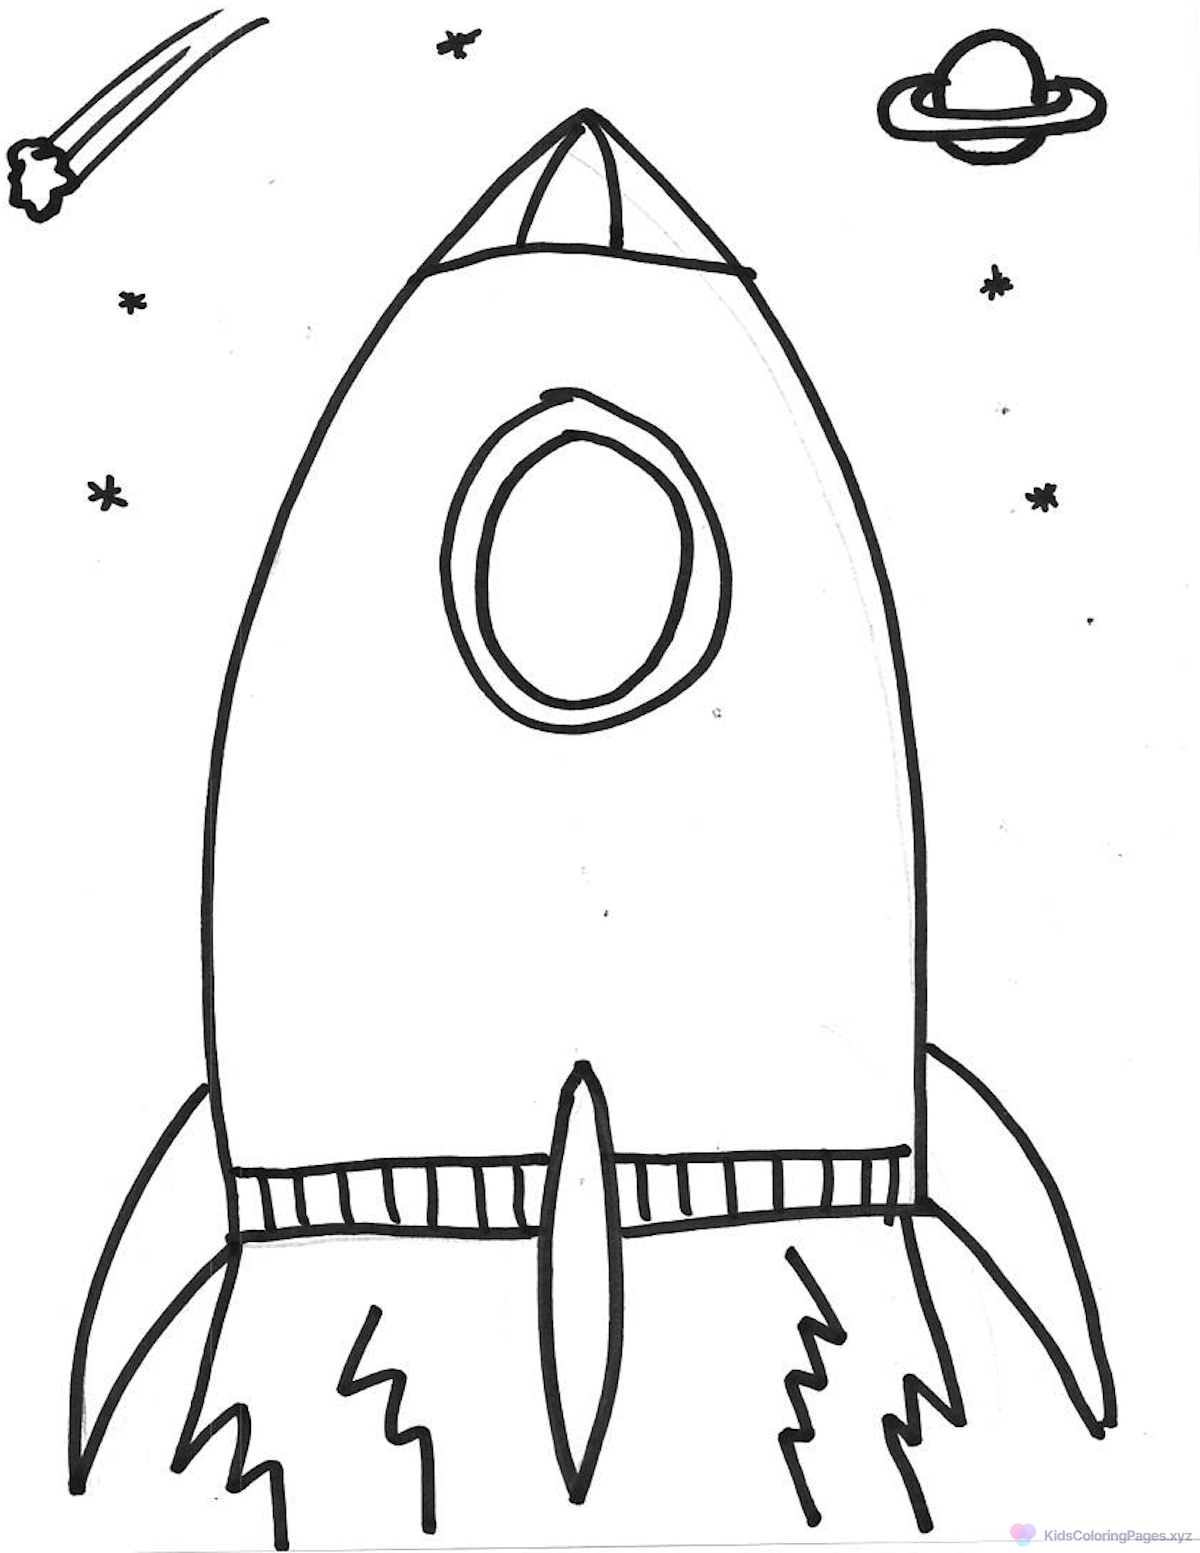 Space Rocket coloring page for printing